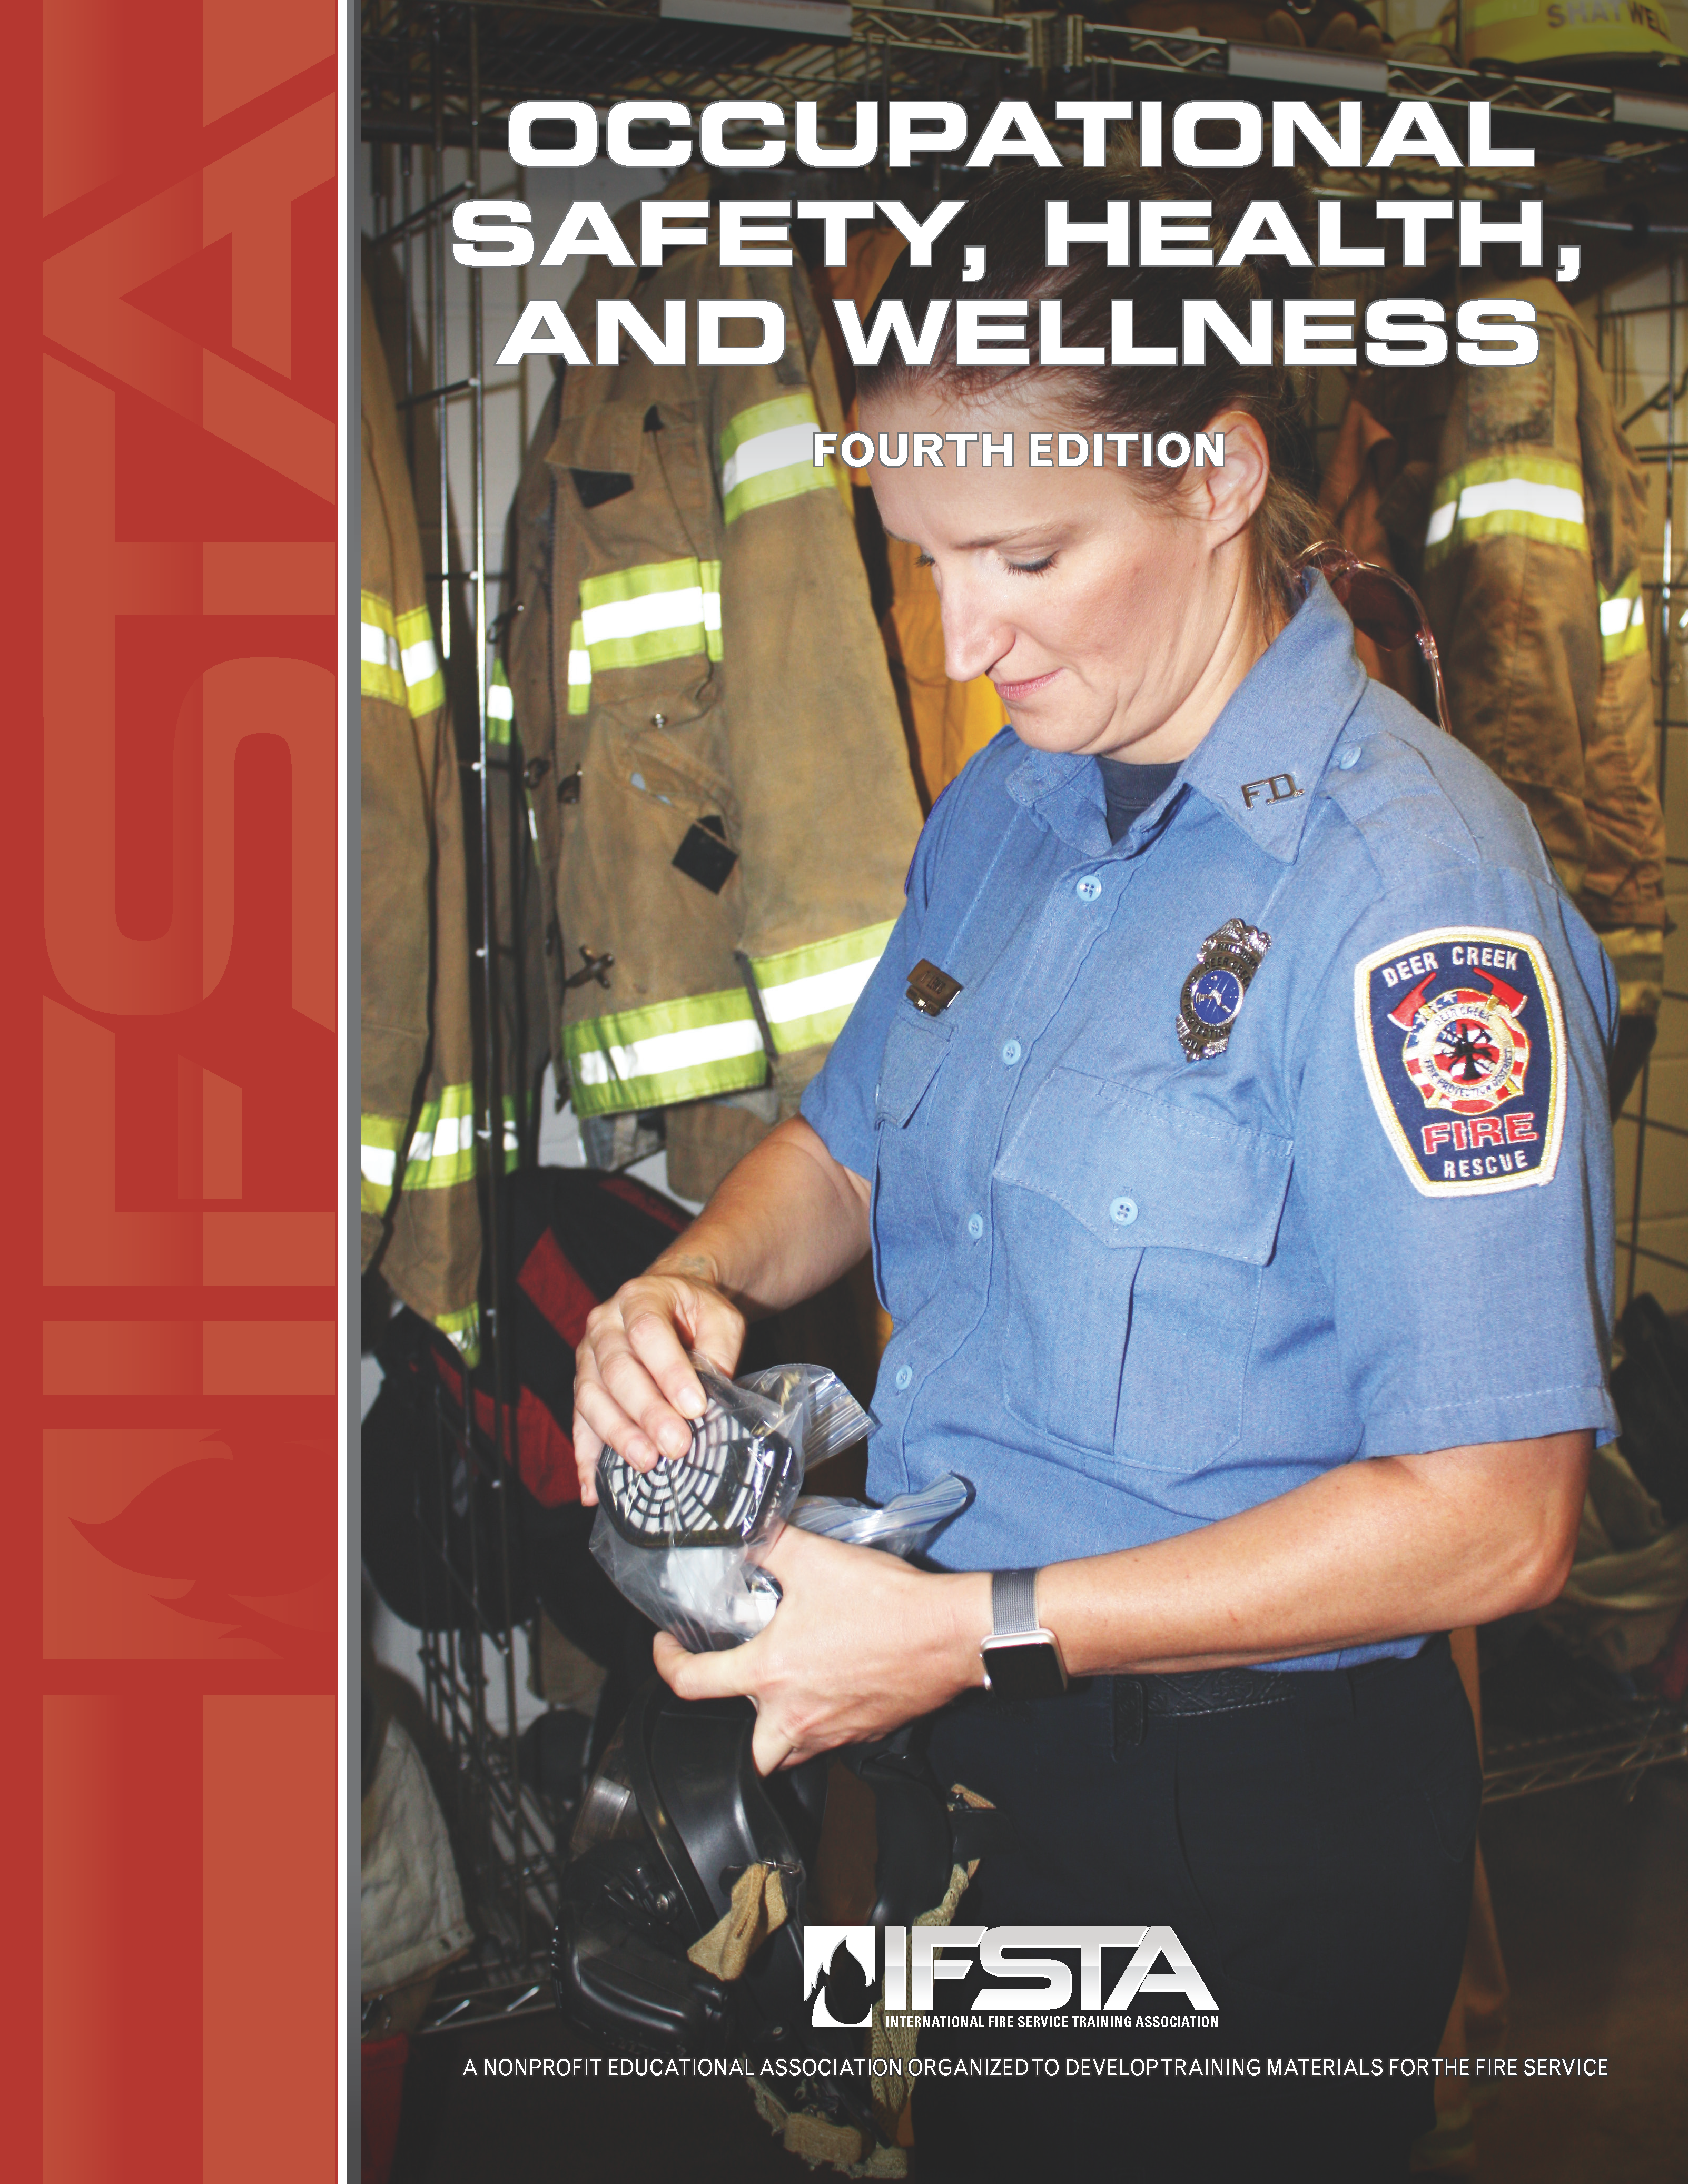 Occupational Safety, Health, and Wellness, 4th Edition